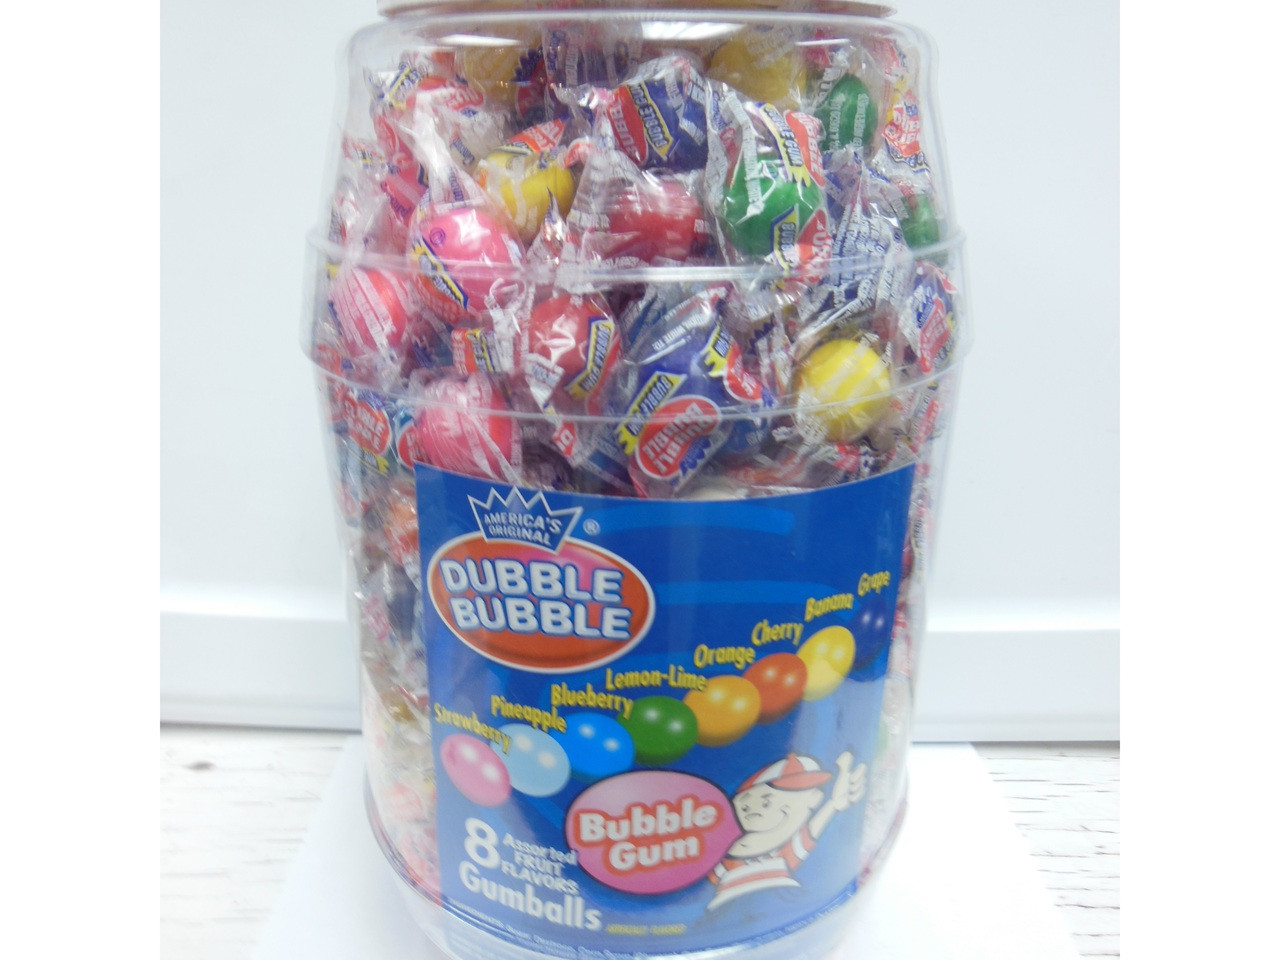 Wrapped White Gumballs- 4 lb.